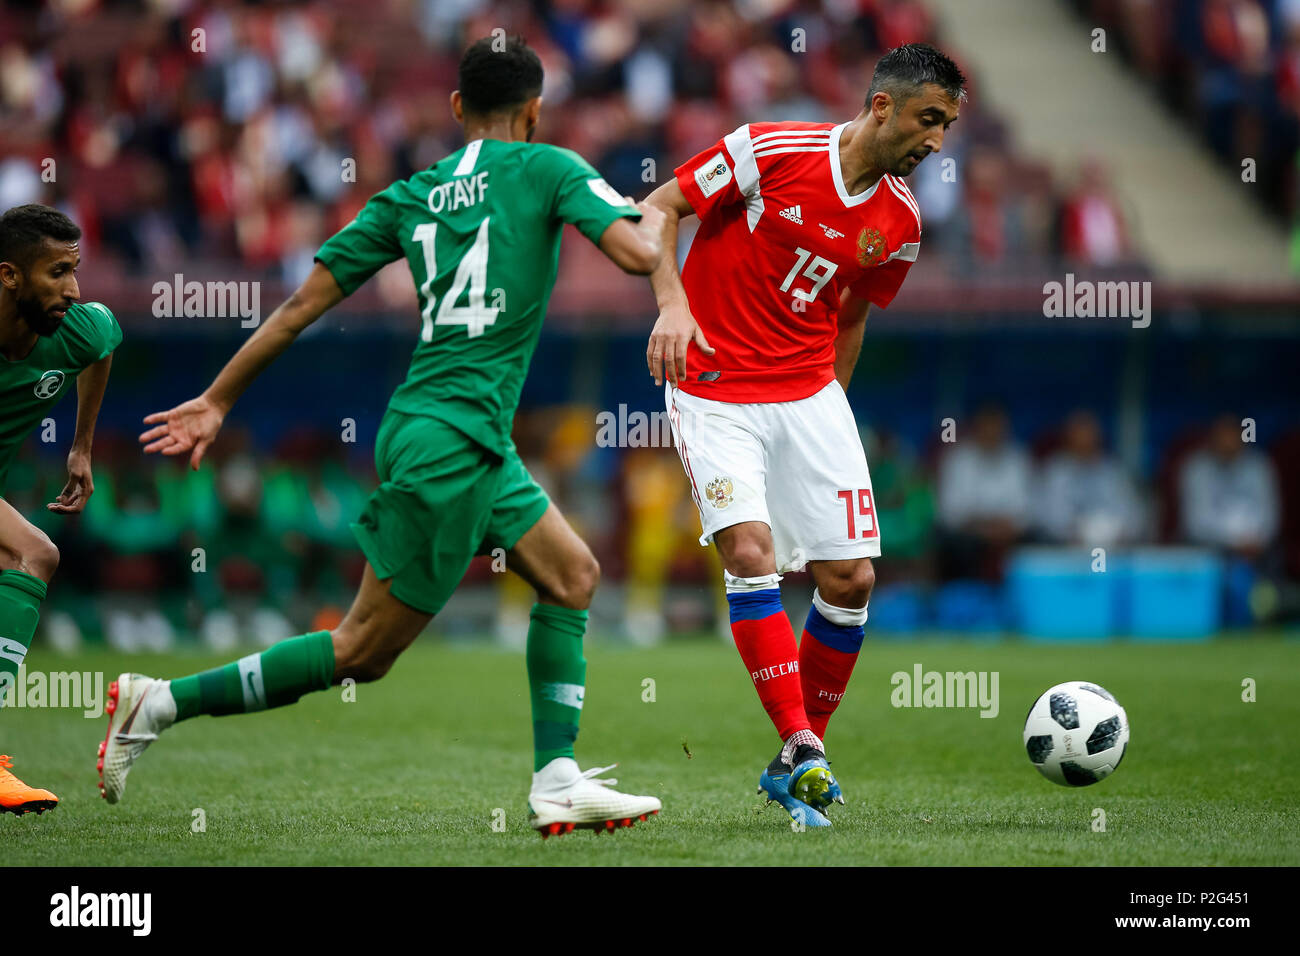 Moscow, Russia. 14th June 2018. Aleksandr Samedov of Russia during the 2018 FIFA World Cup Group A match between Russia and Saudi Arabia at Luzhniki Stadium on June 14th 2018 in Moscow, Russia. Credit: PHC Images/Alamy Live News Stock Photo